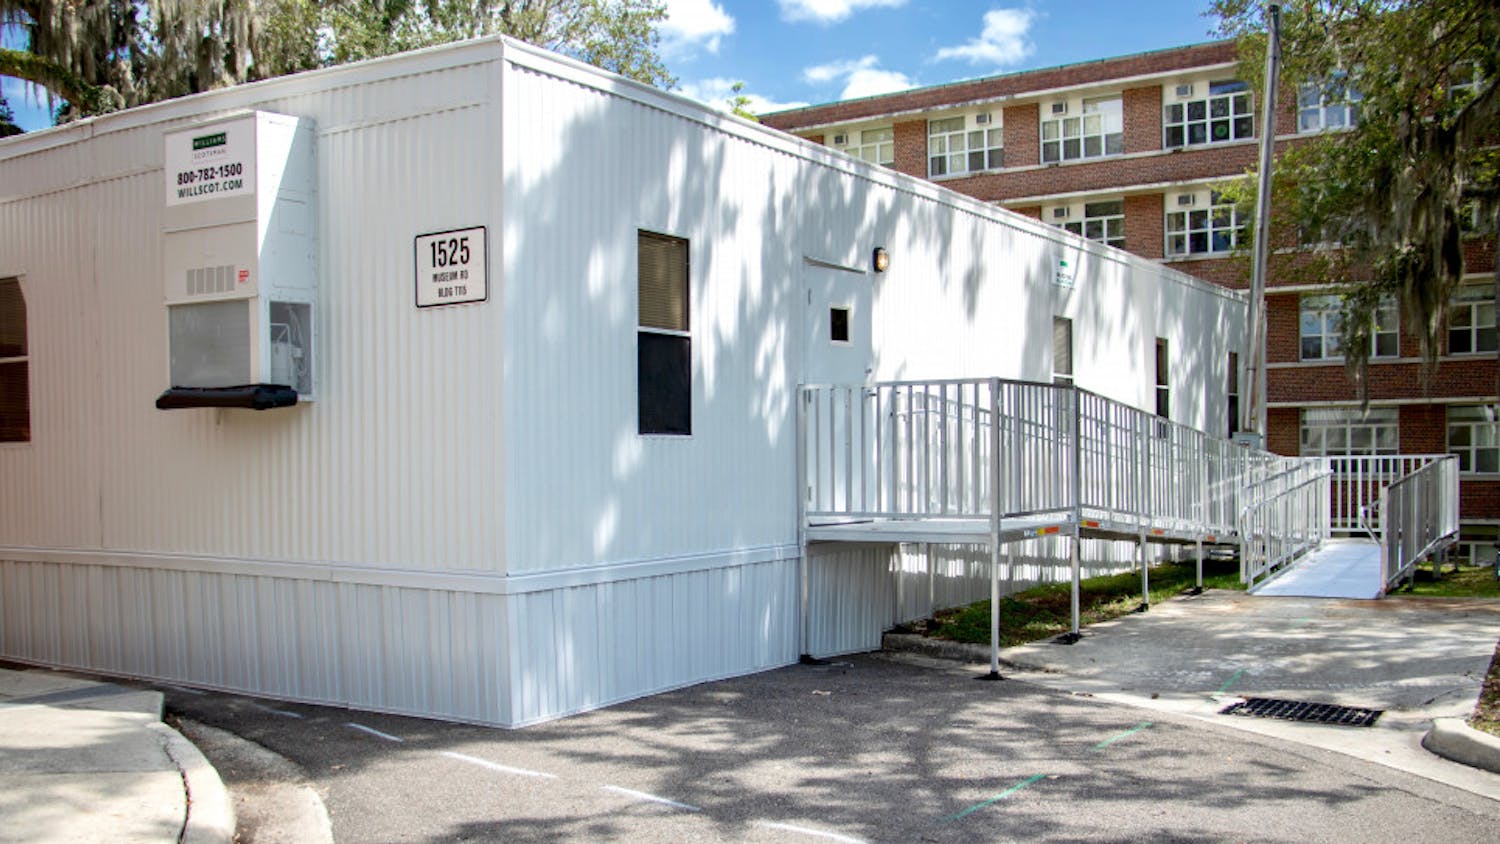 University Police staff will move into a modular building — of three portables bolted together — while their building is assessed for safety and tested by a private contractor, which could take about three weeks. The temporary facility will be about 3,500 square feet and cost $2,200 to rent per month.